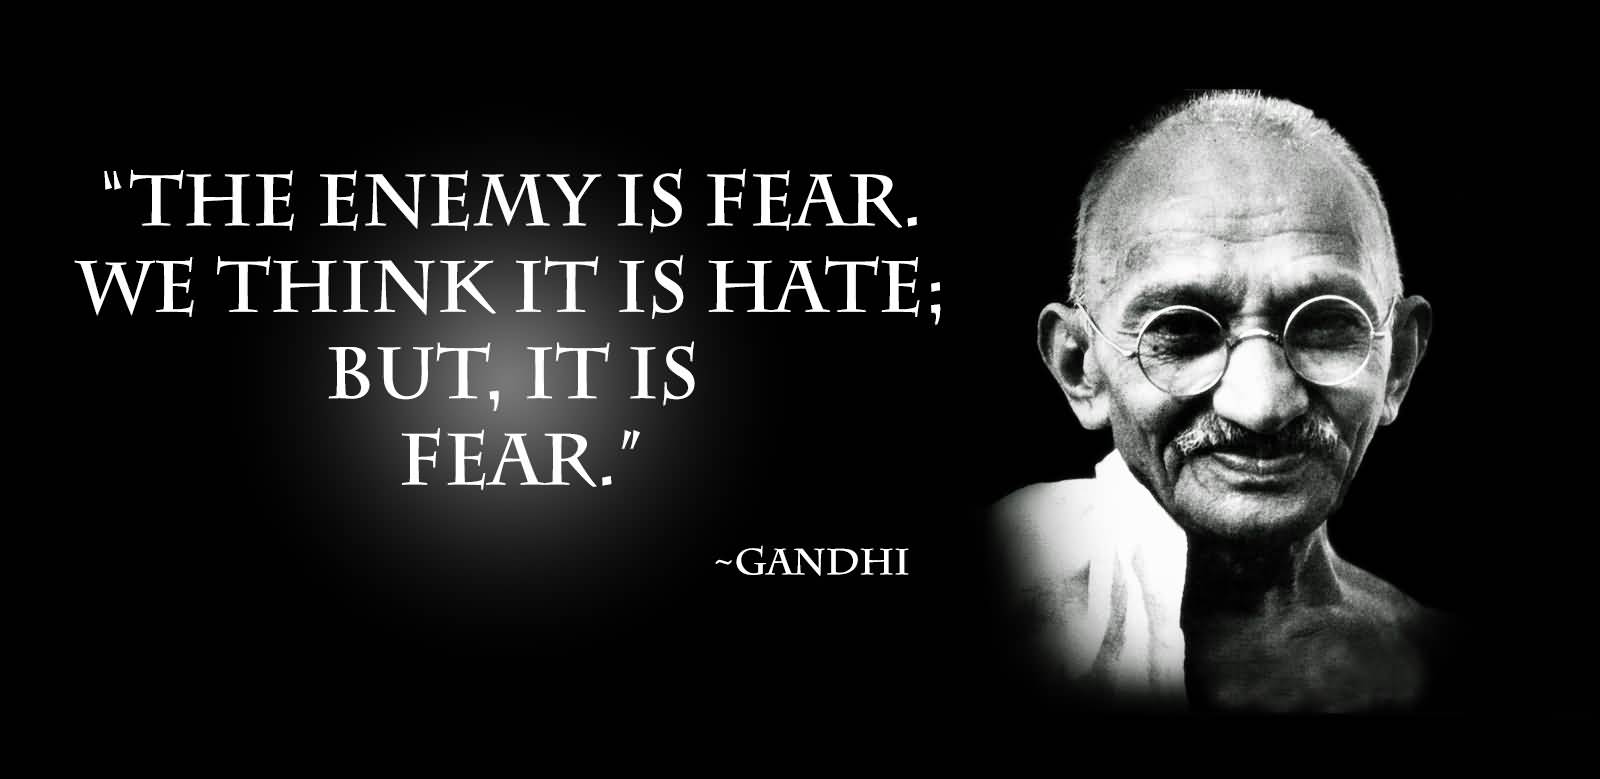 The Enemy is Fear. We think it is hate; but, it is fear. Gandhi